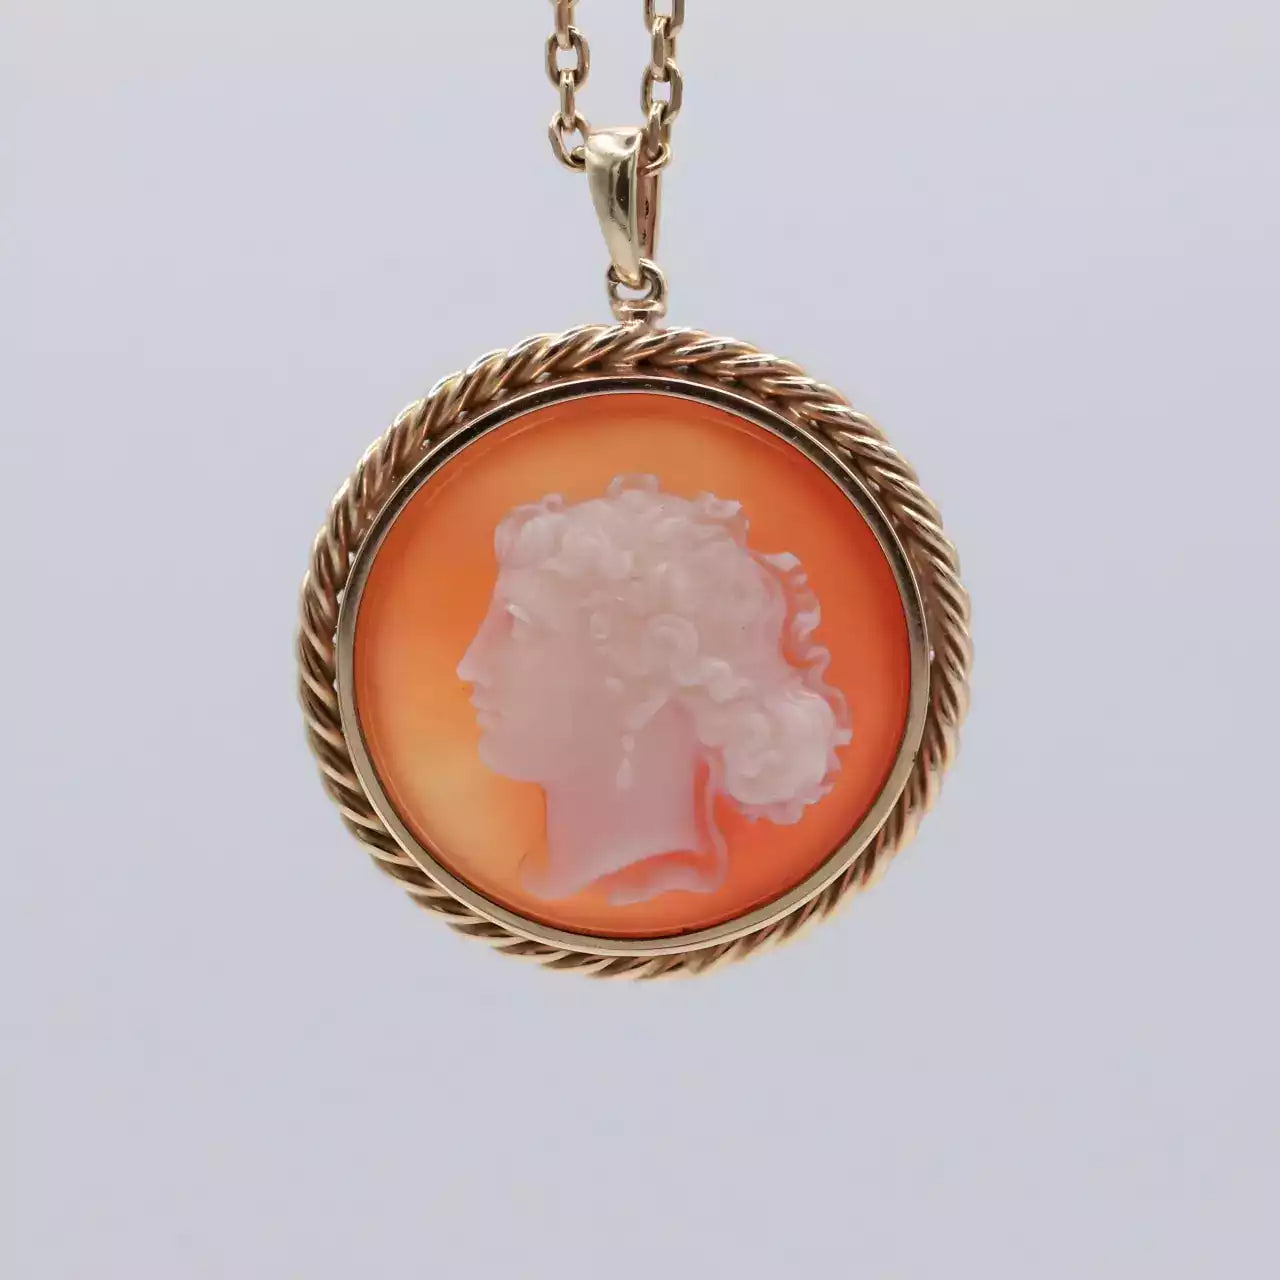 Twisted pendant - Anitque cameo